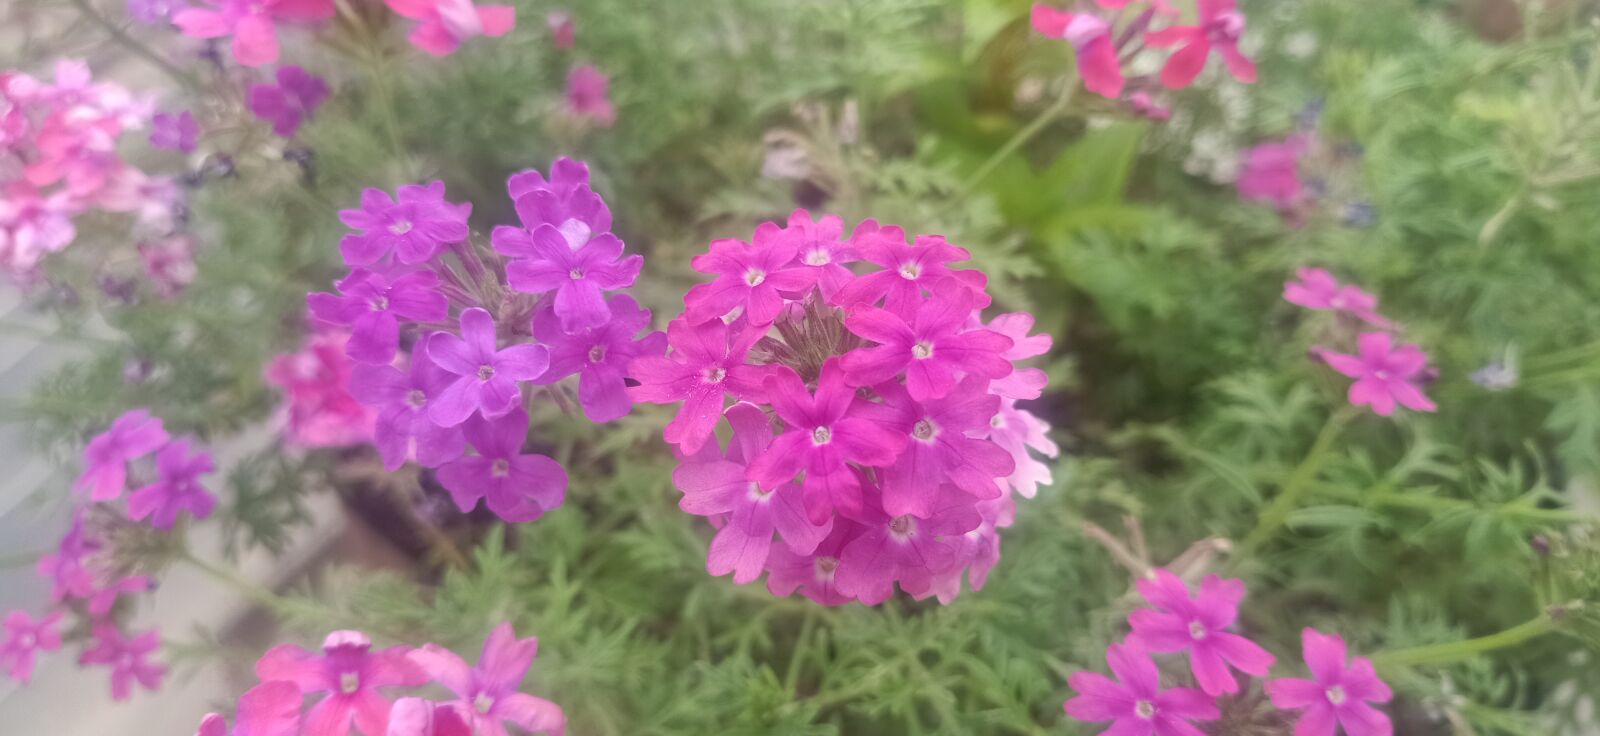 OPPO F11 sample photo. Flowers, garden, nature photography